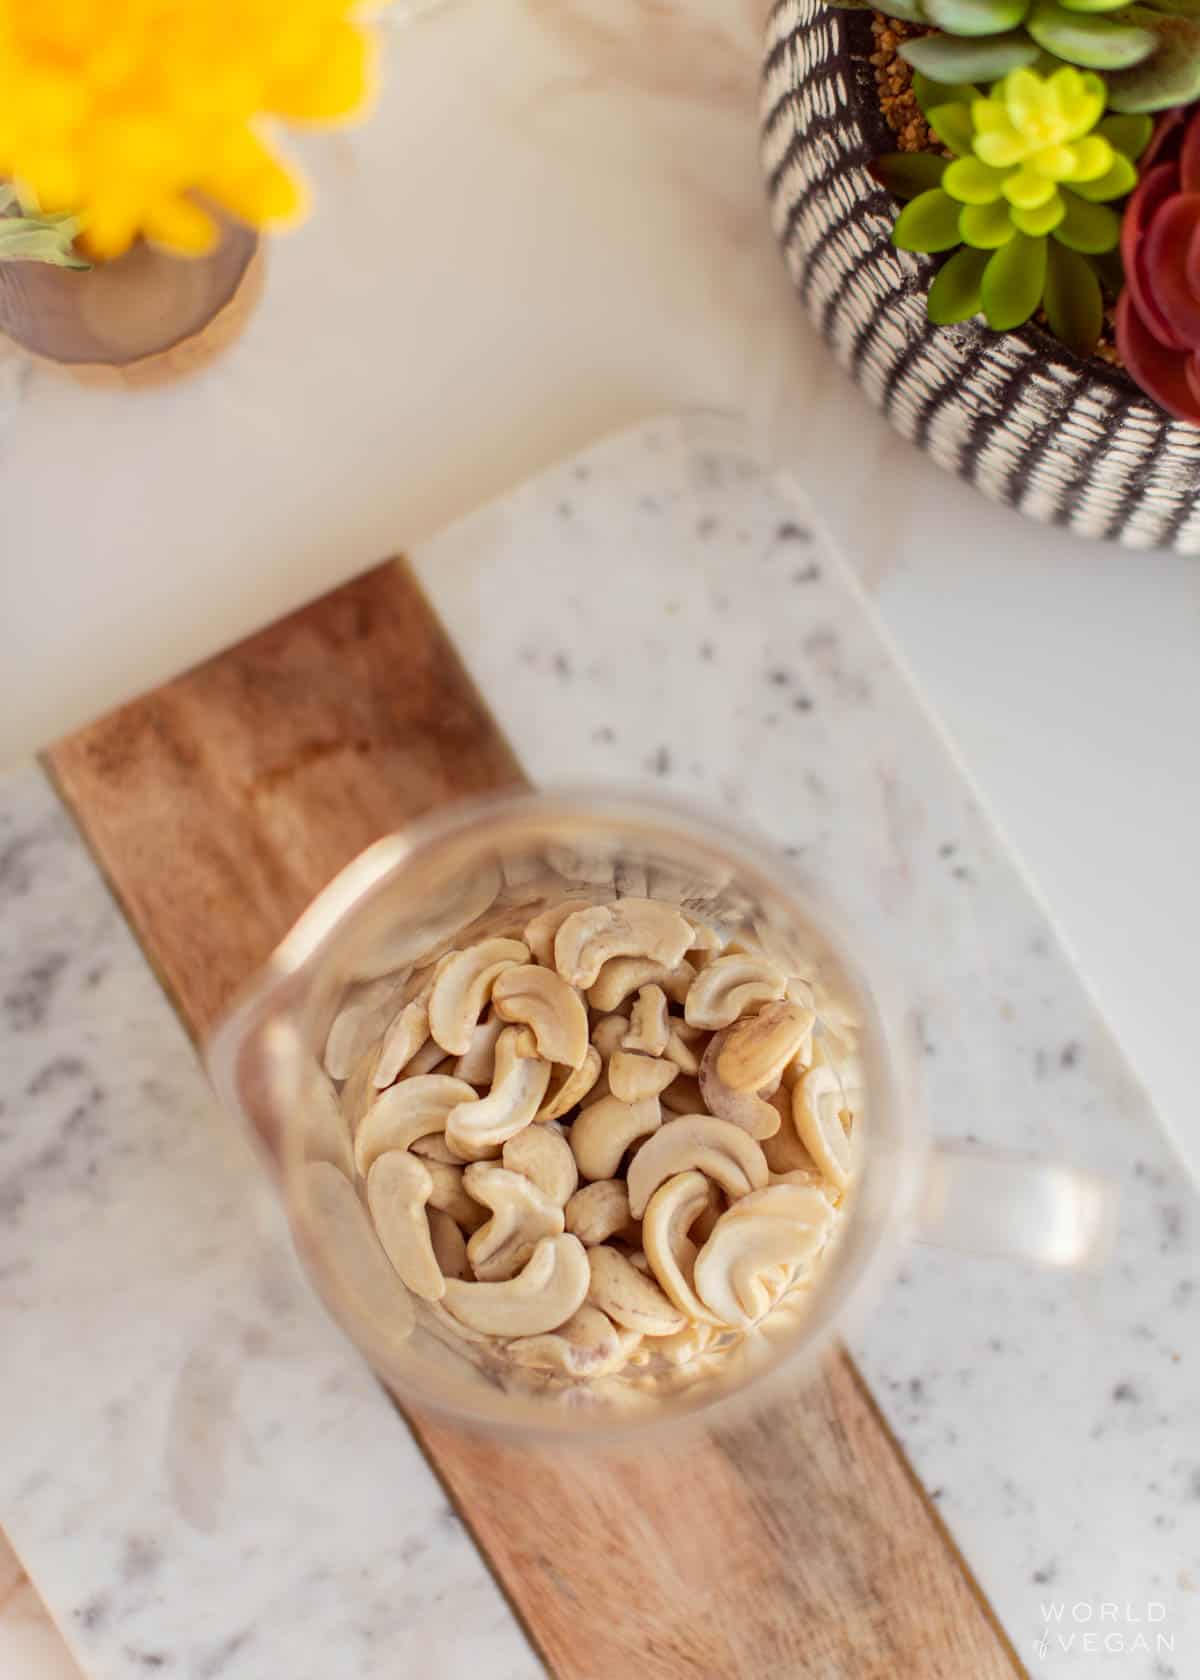 Raw cashews in a glass measuring cup.